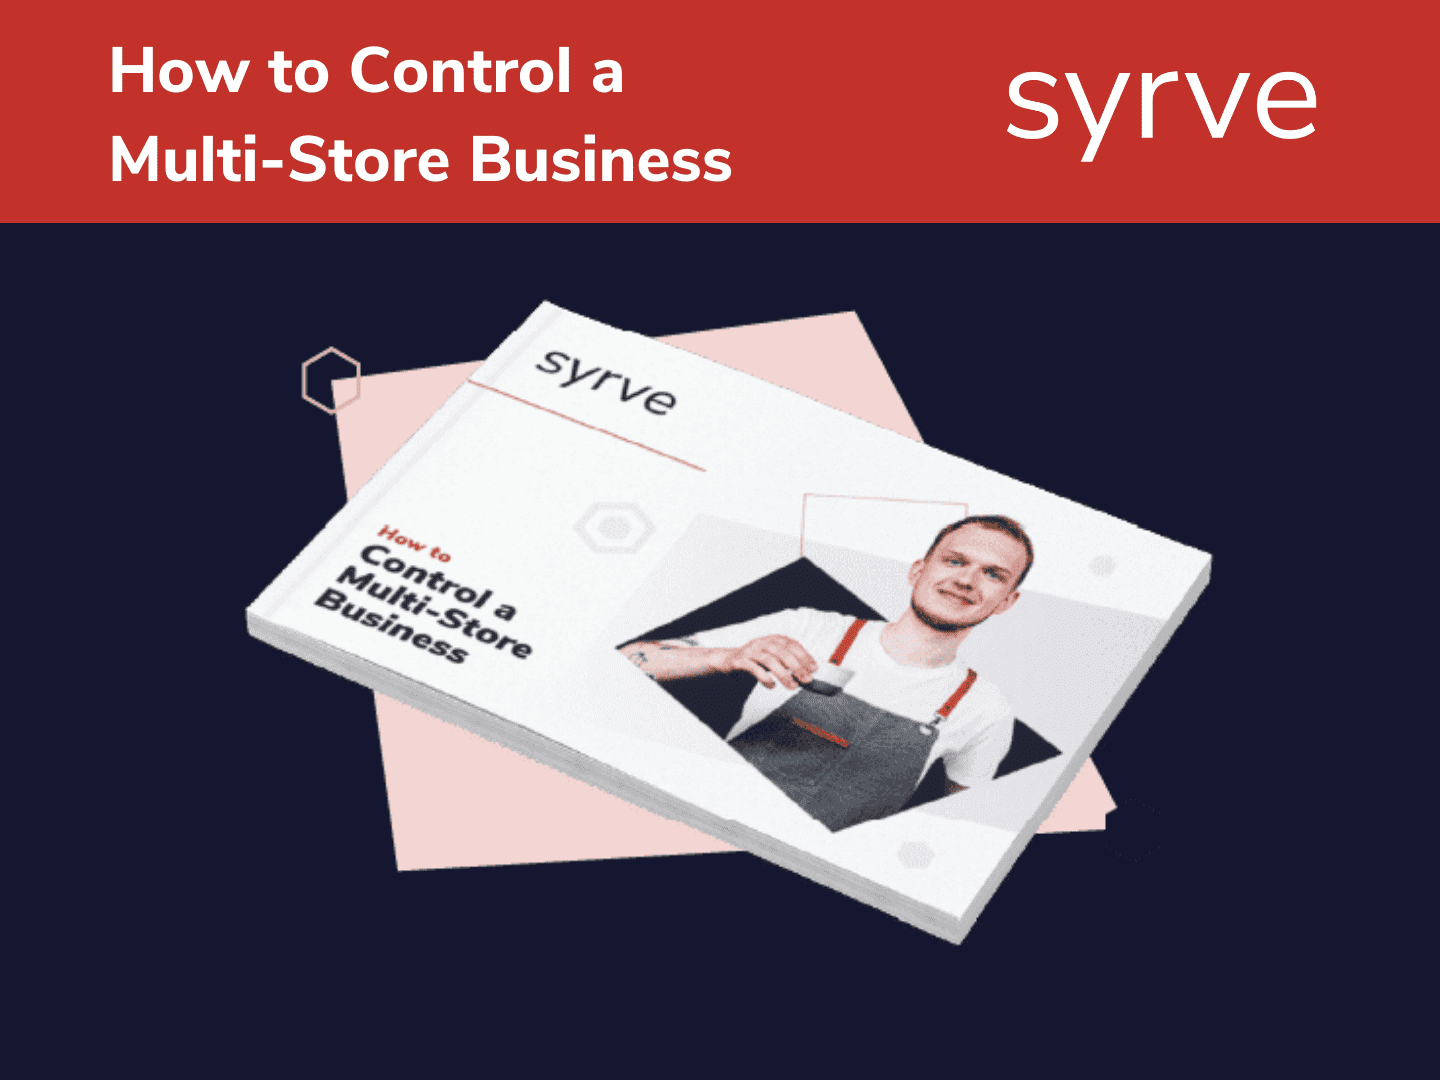 How to Control a Multi-Store Business